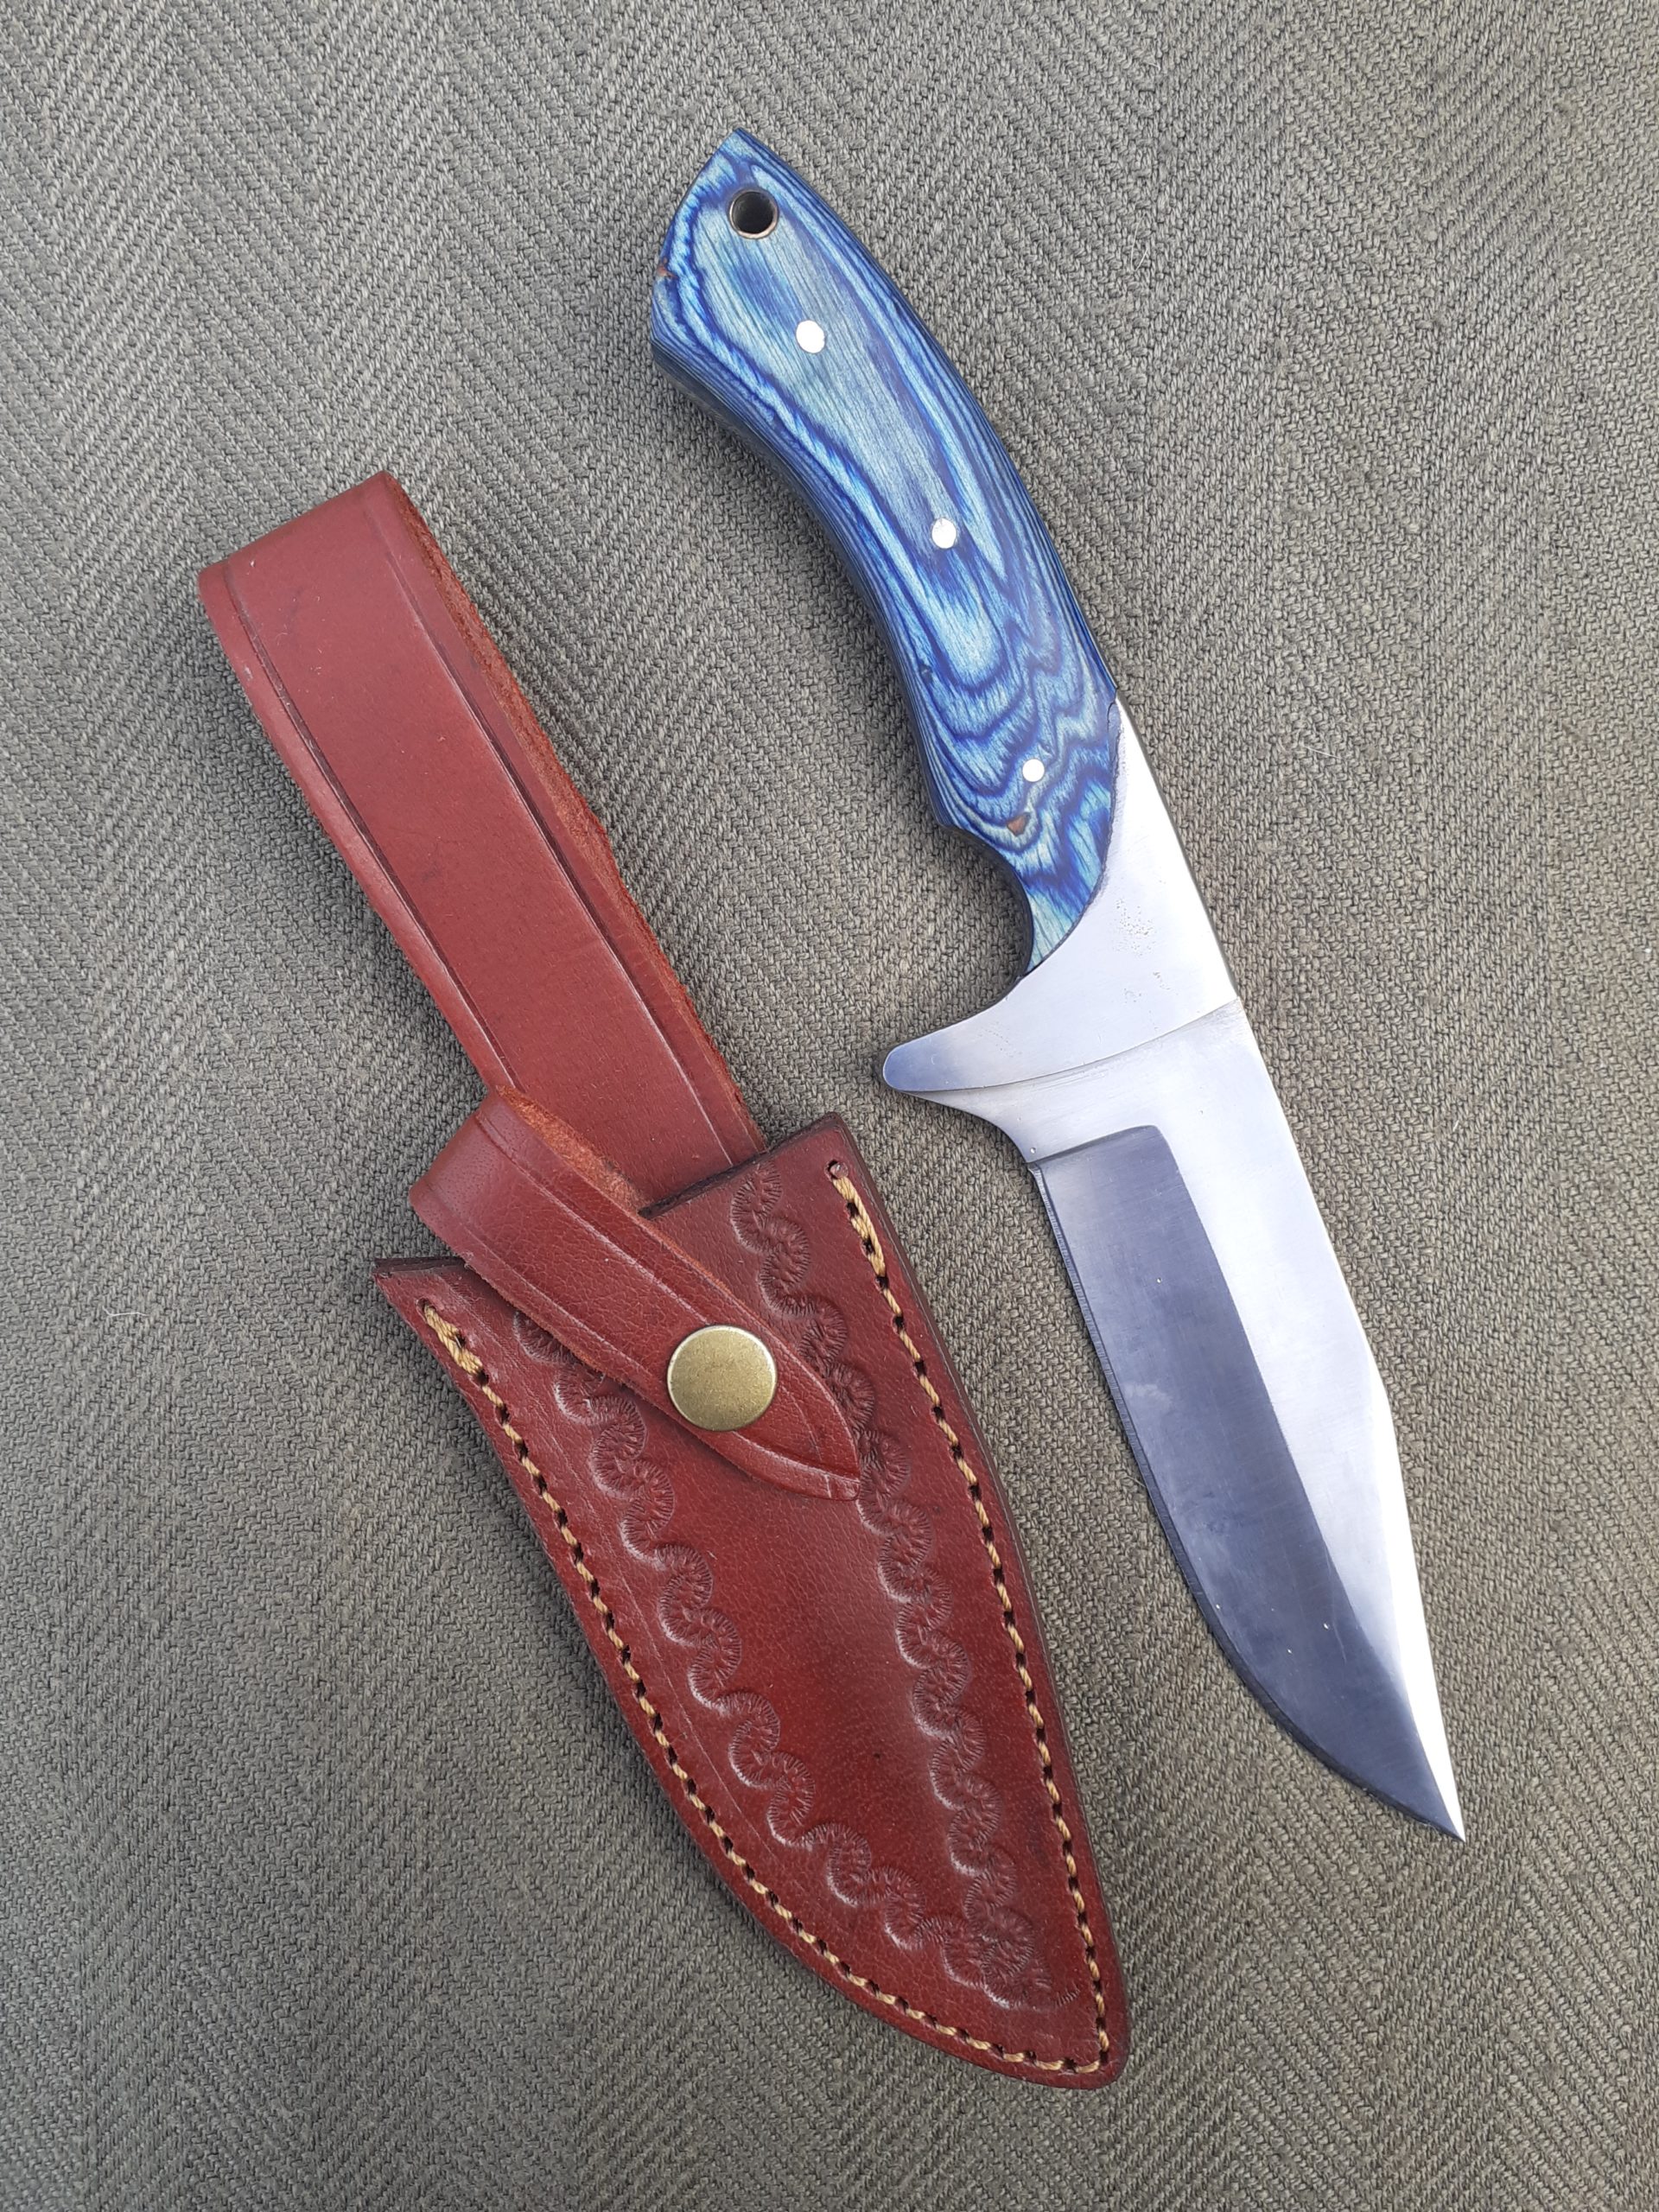 Falconers' knife (stainless steel) - Ben Long Falconry